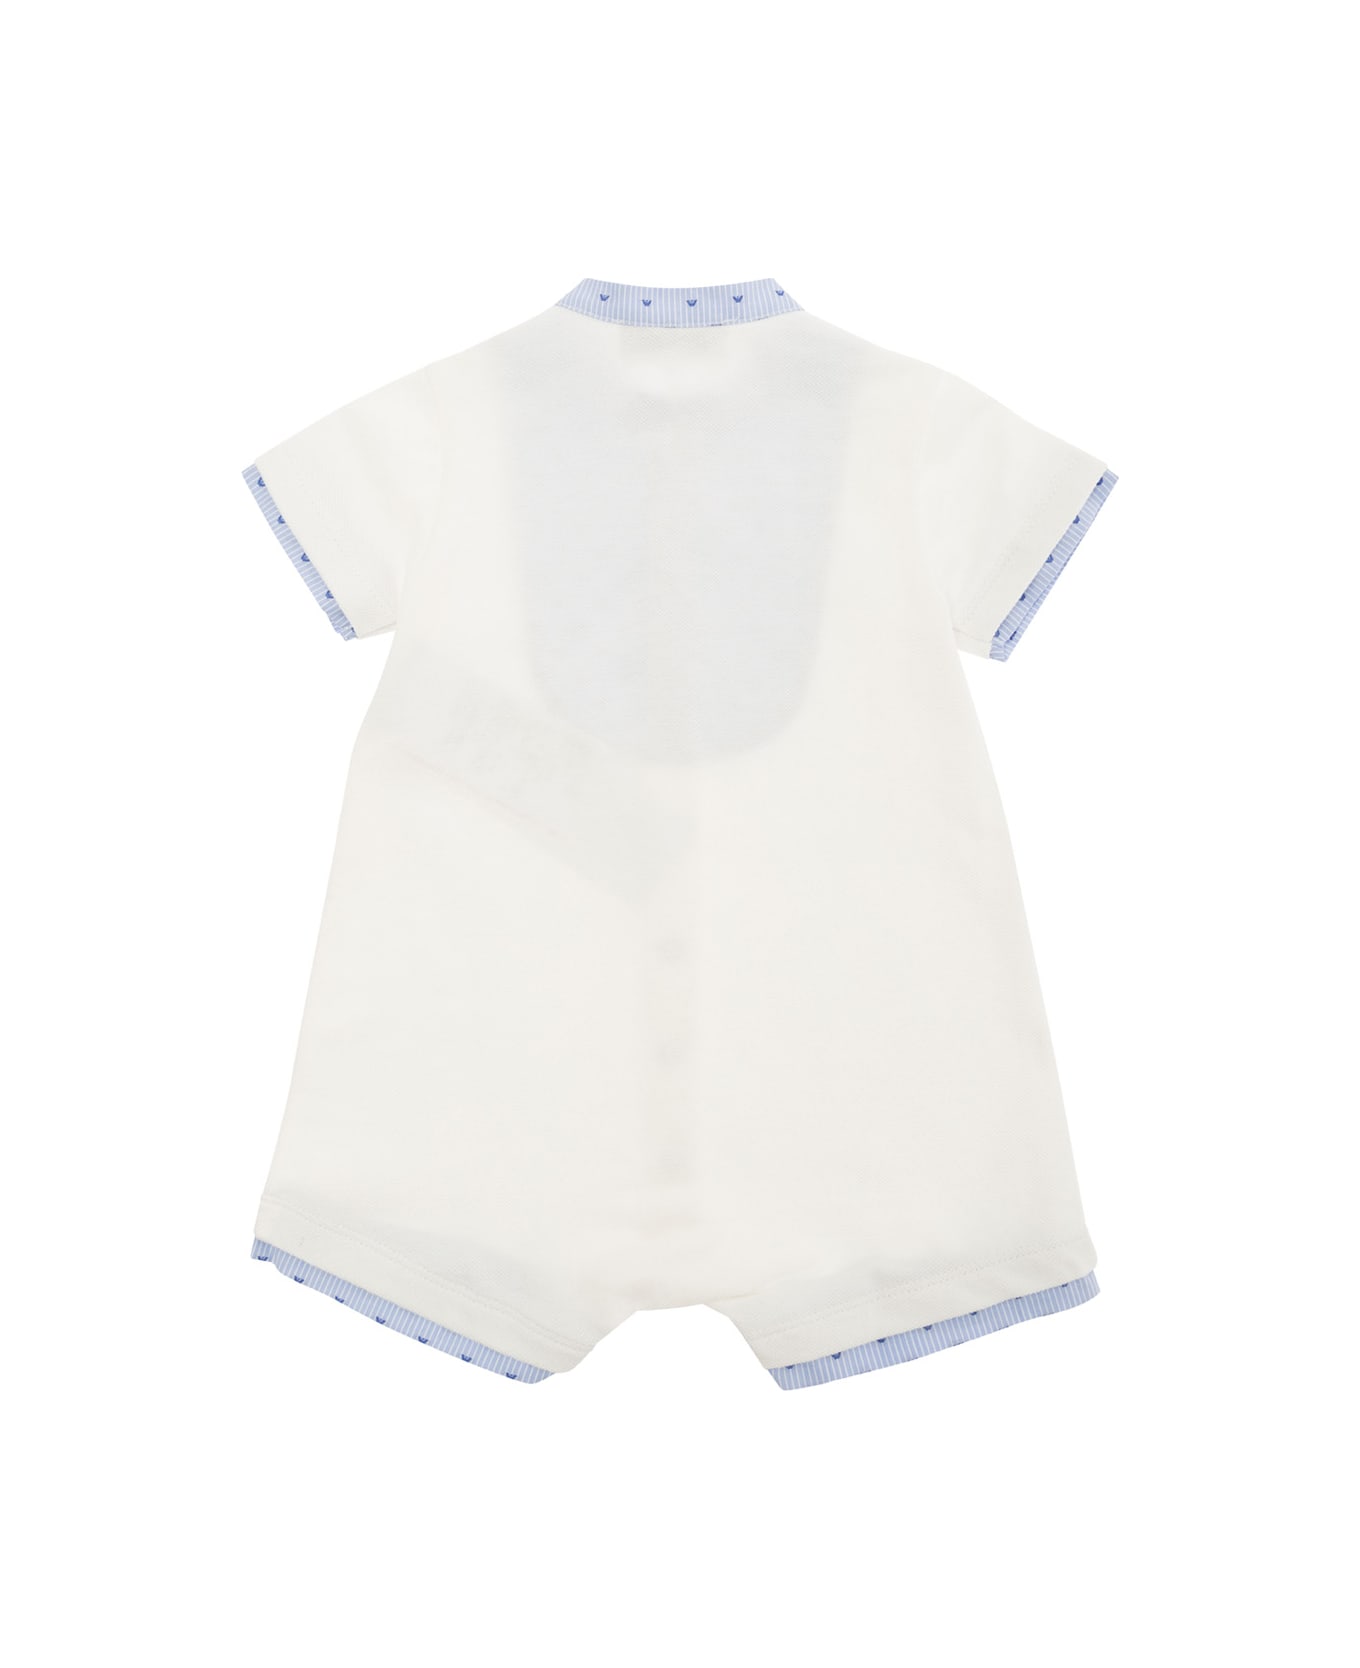 Emporio Armani Light Blue And White Onesie With Stripe And Logo Motif In Cotton Baby - Multicolor